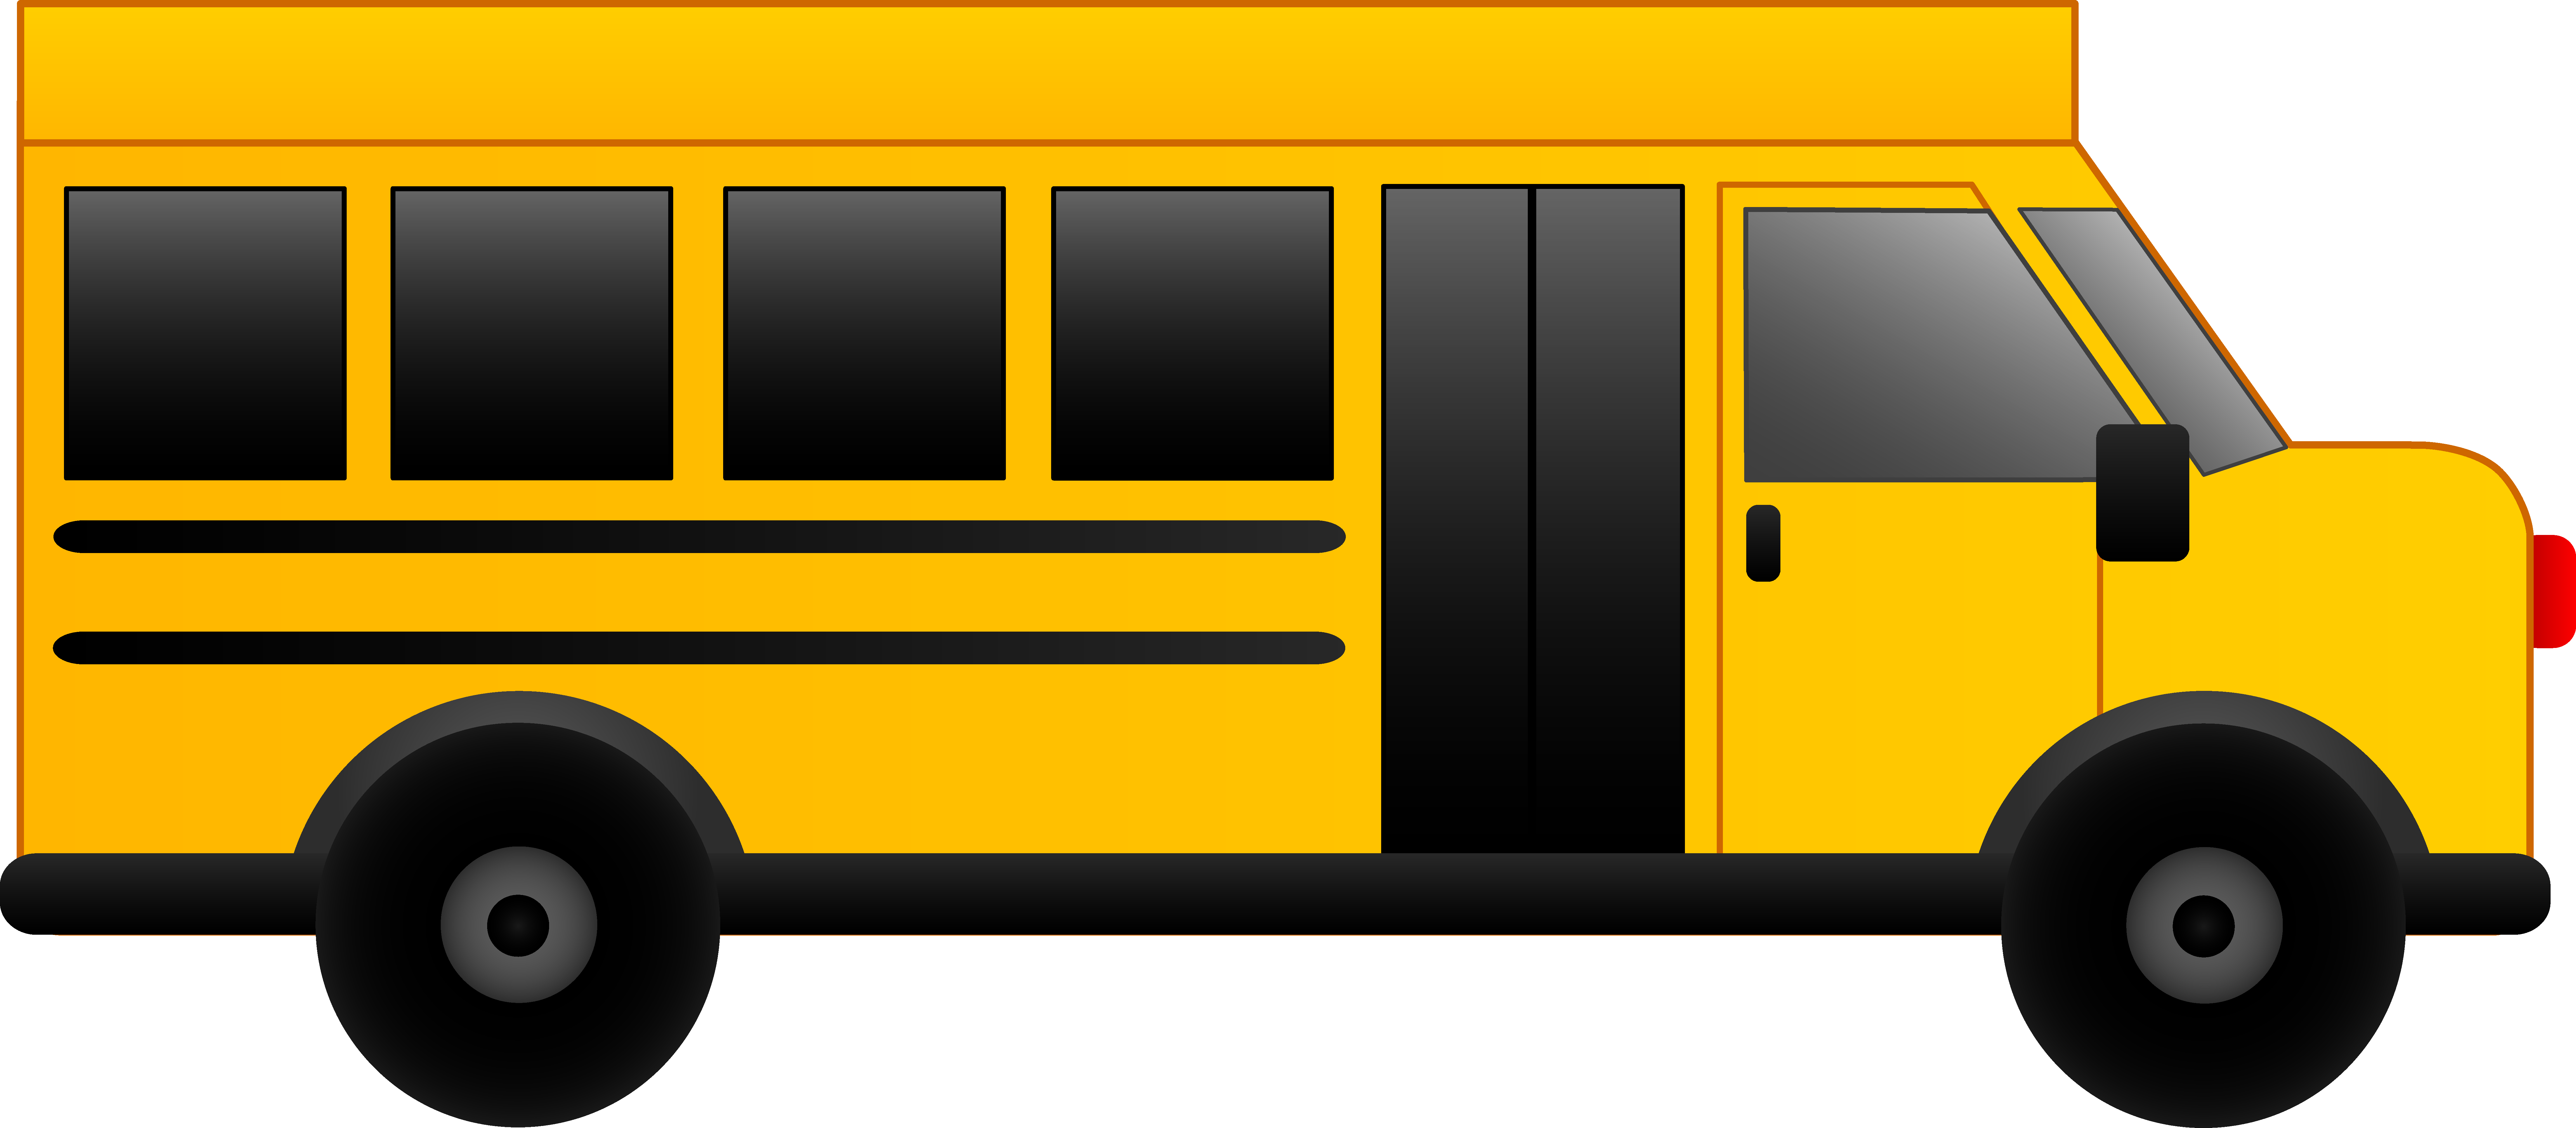 free clipart of a school bus - photo #27